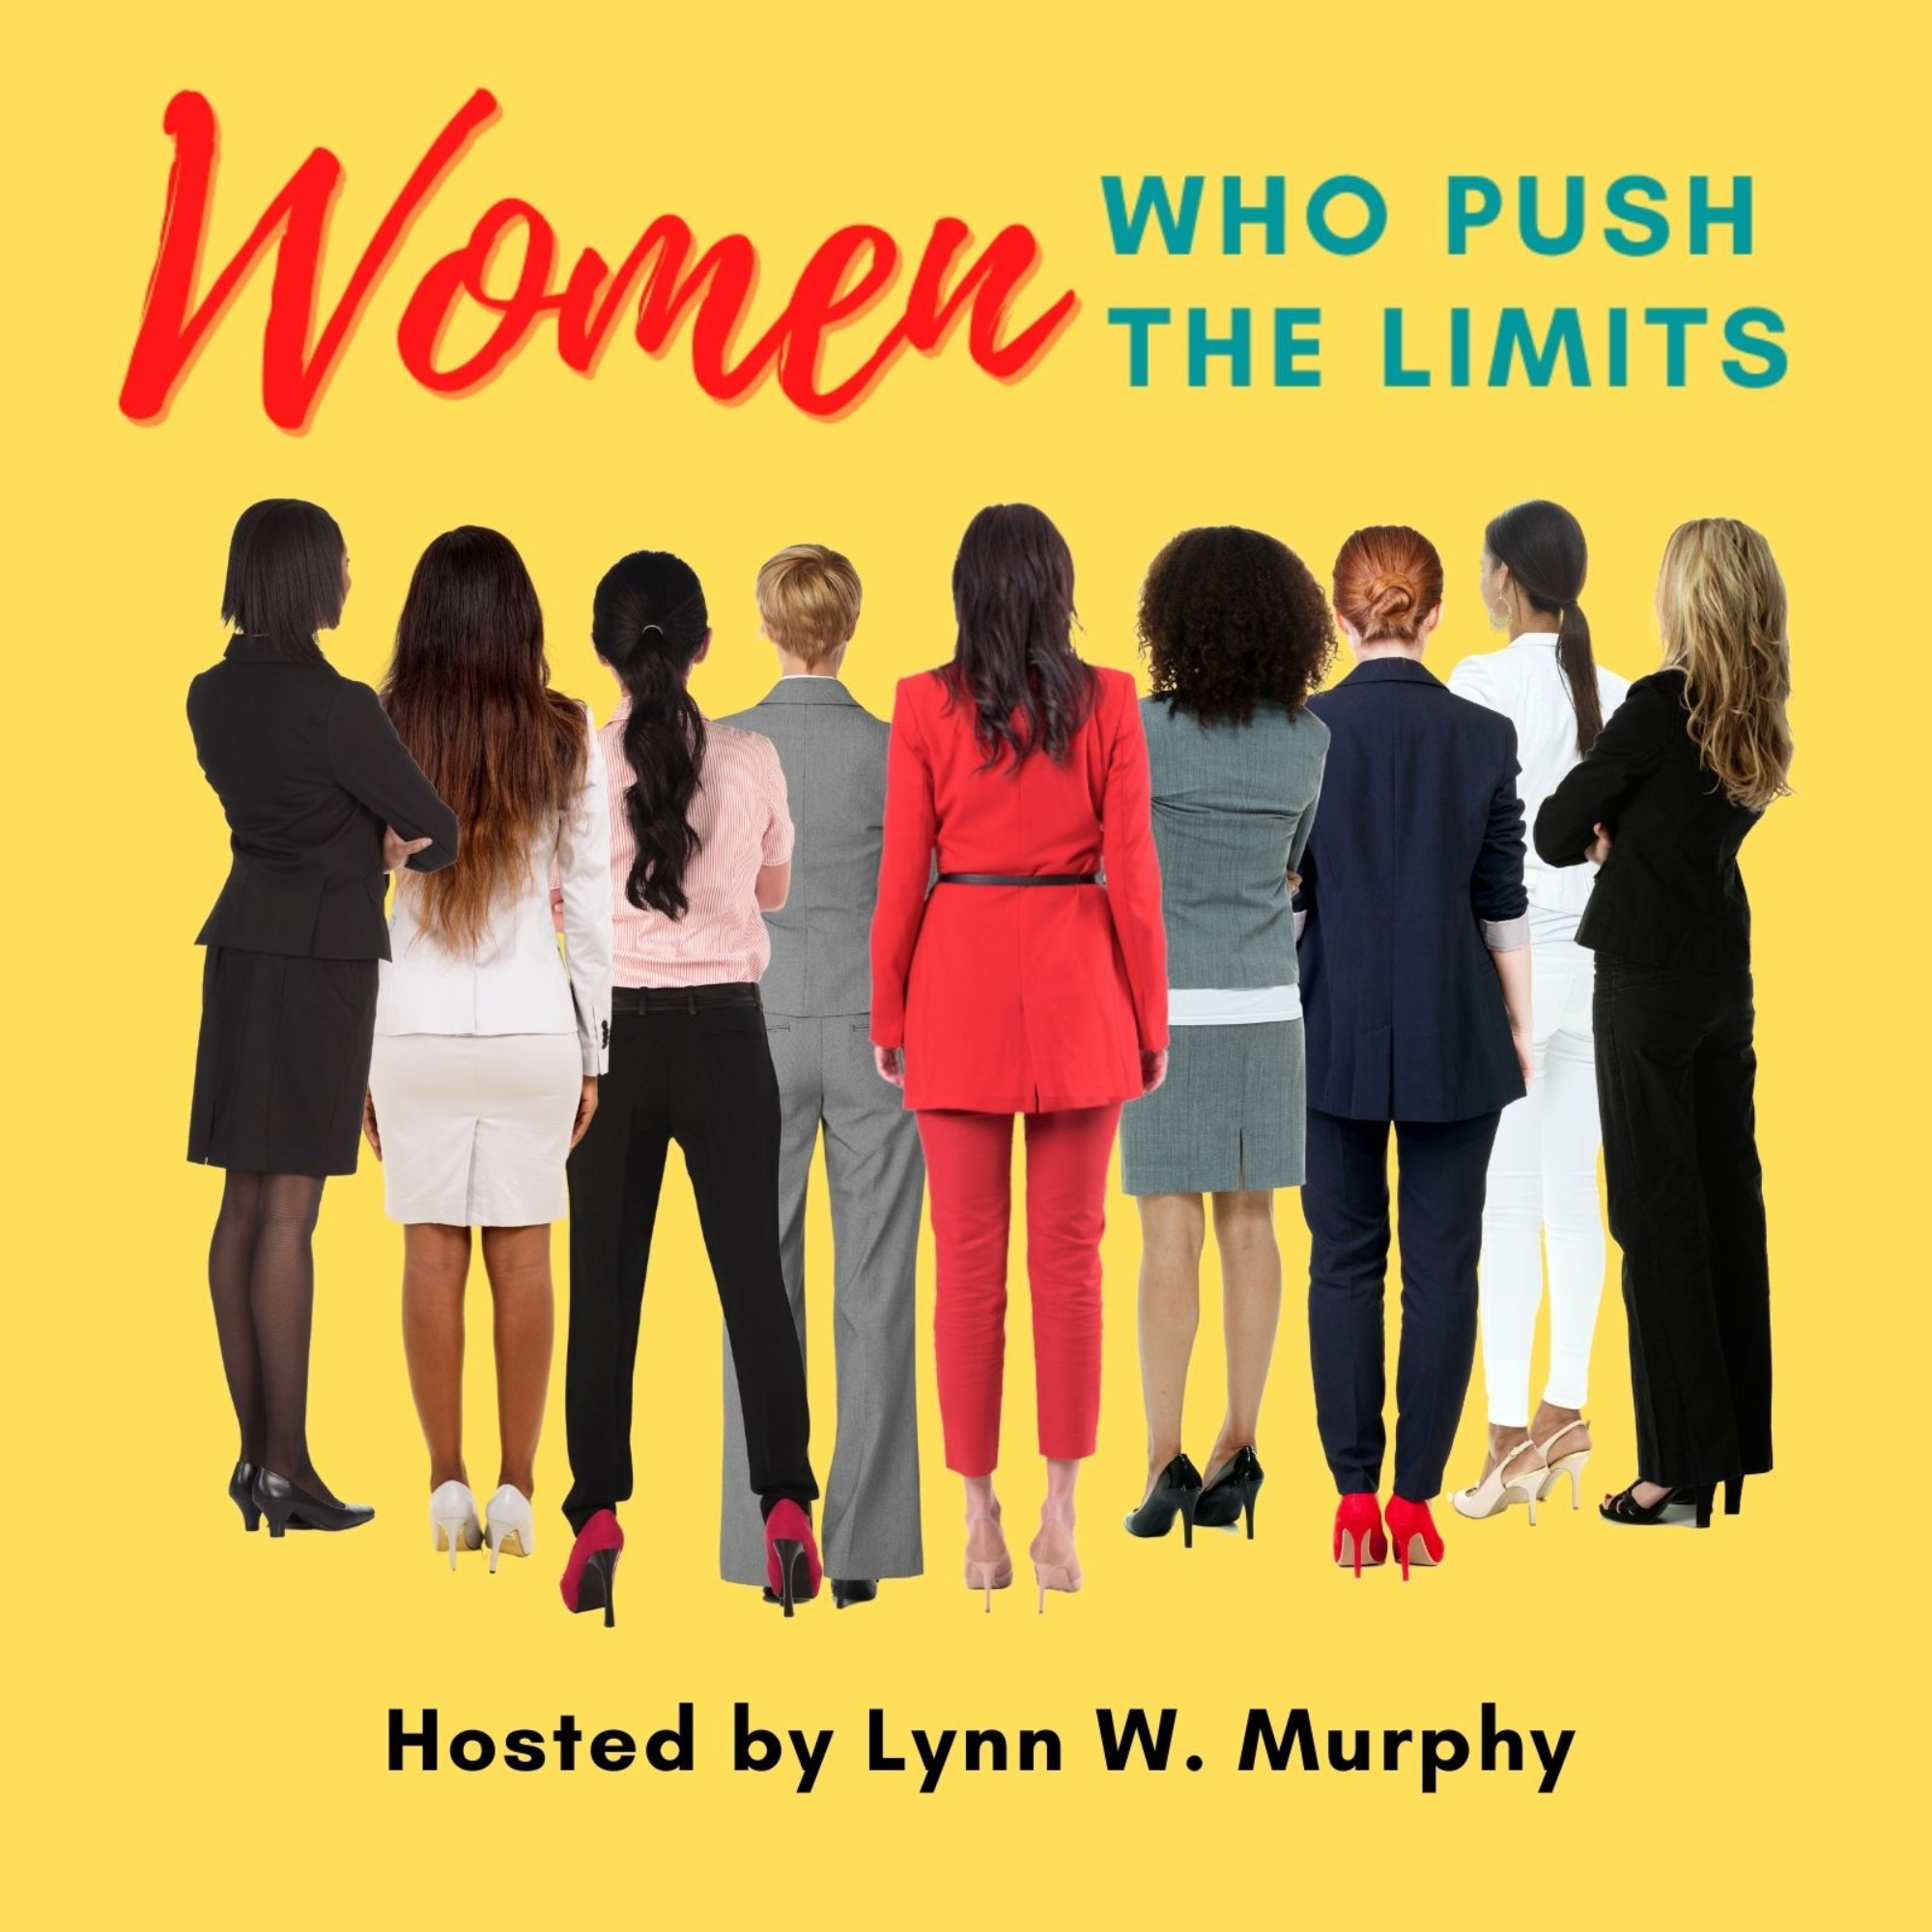 Women Who Push the Limits Podcast